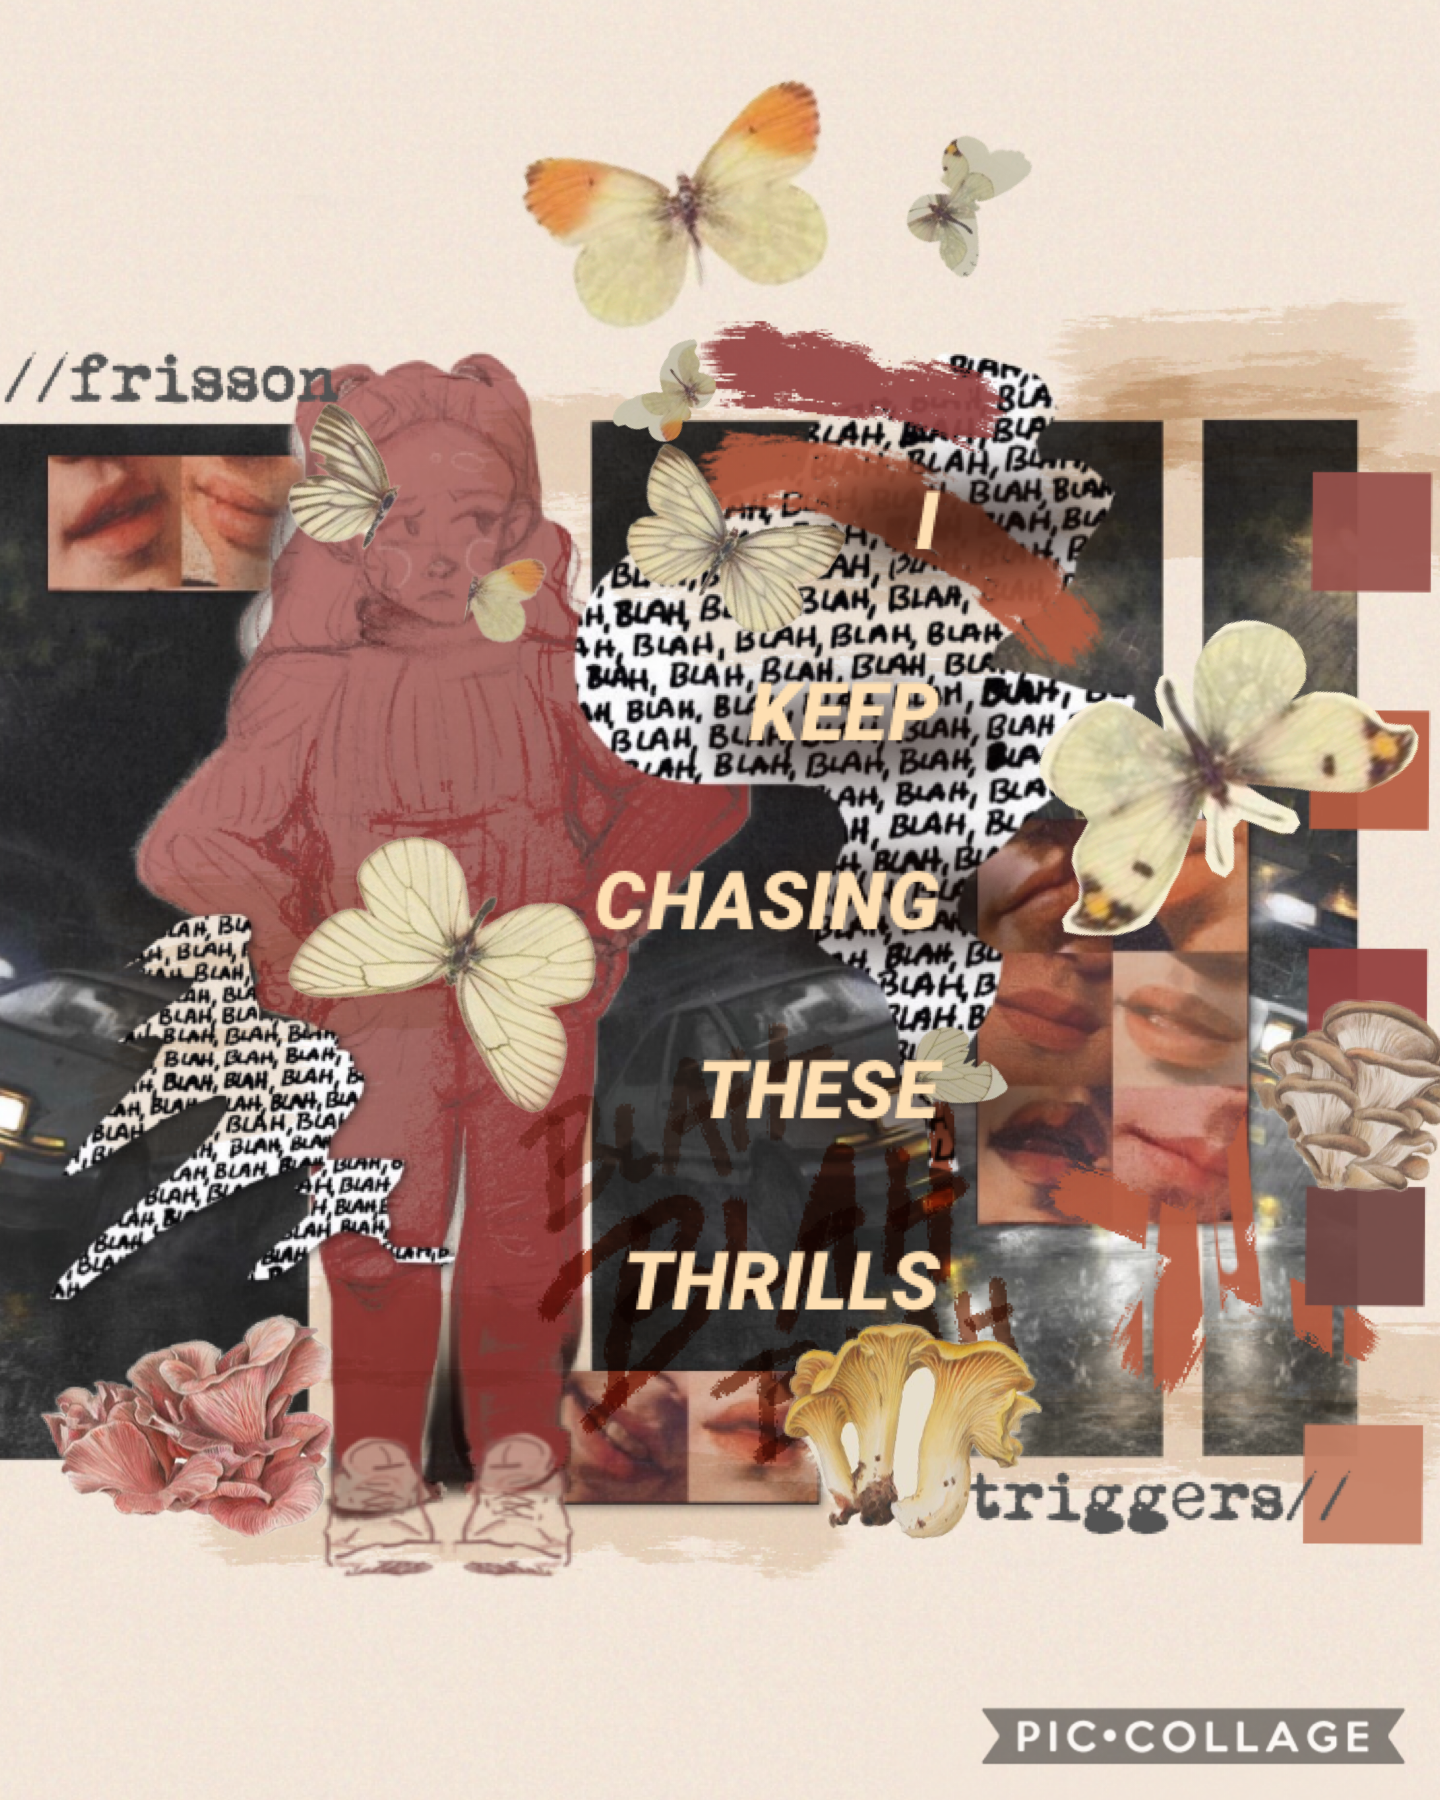 IFL FRISSON TRIGGERS I have a whole playlist of songs that trigger frisson
•••
Feat. a lil self portrait of meeee it don’t really look like me, she do be wearing my clothes doe
•••
I was gonna our this in a series but then my other ideas fell apart so may